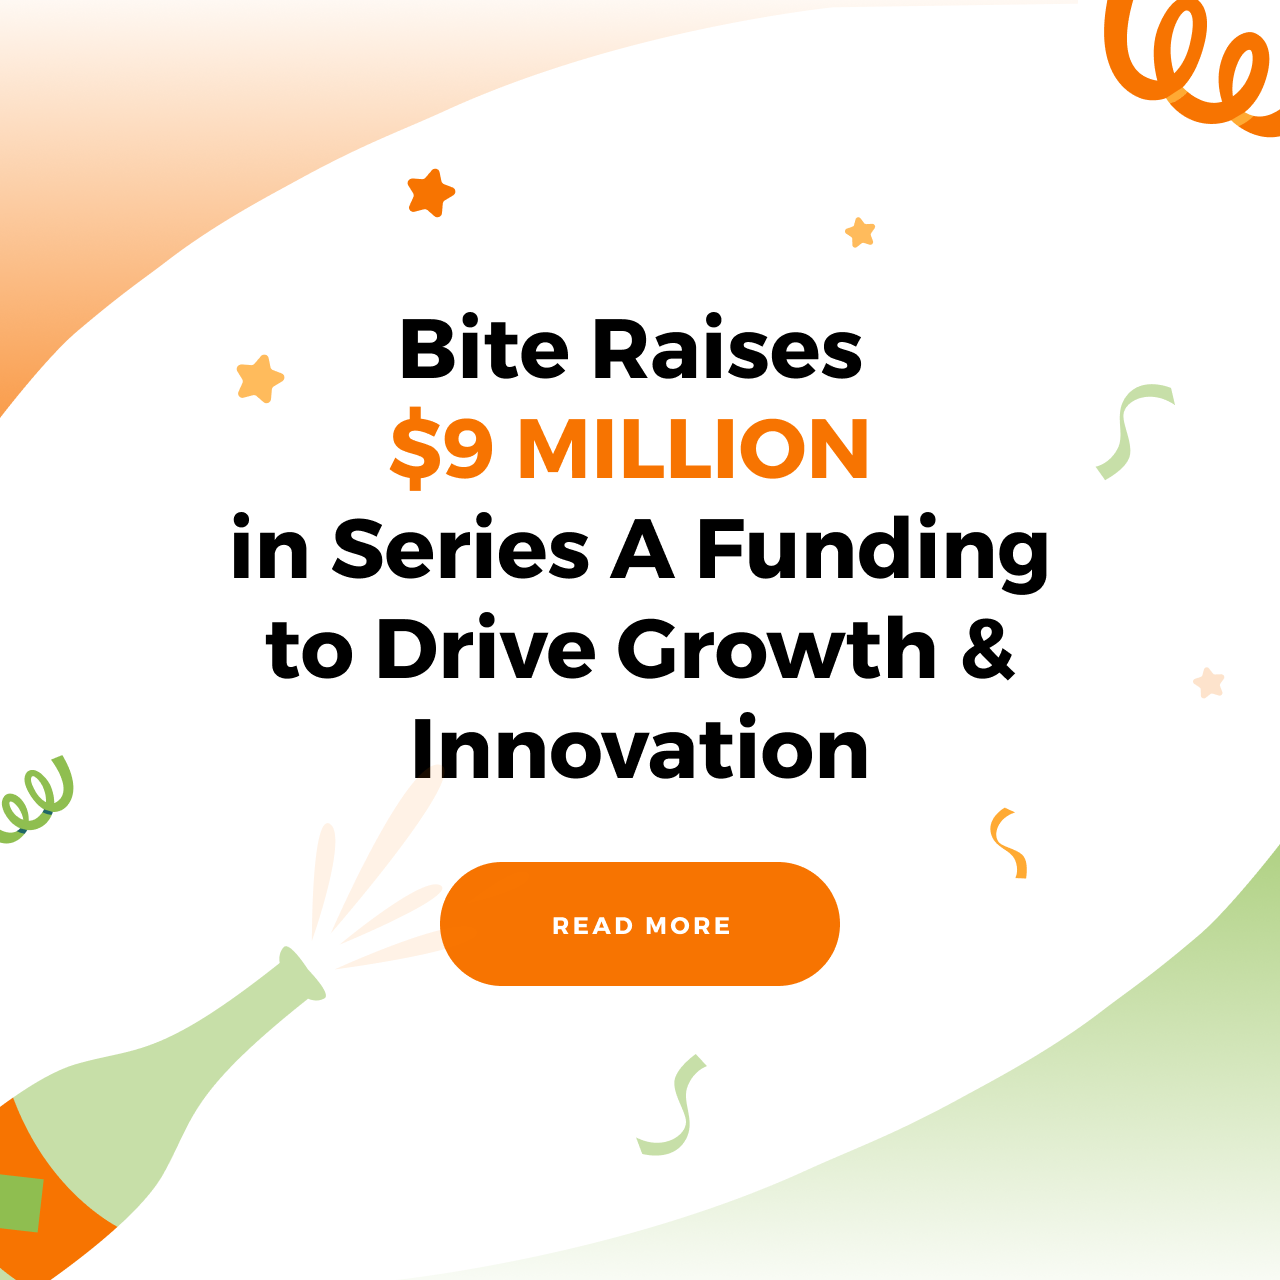 Bite Raises $9 Million in Series A Funding to Drive Growth & Innovation